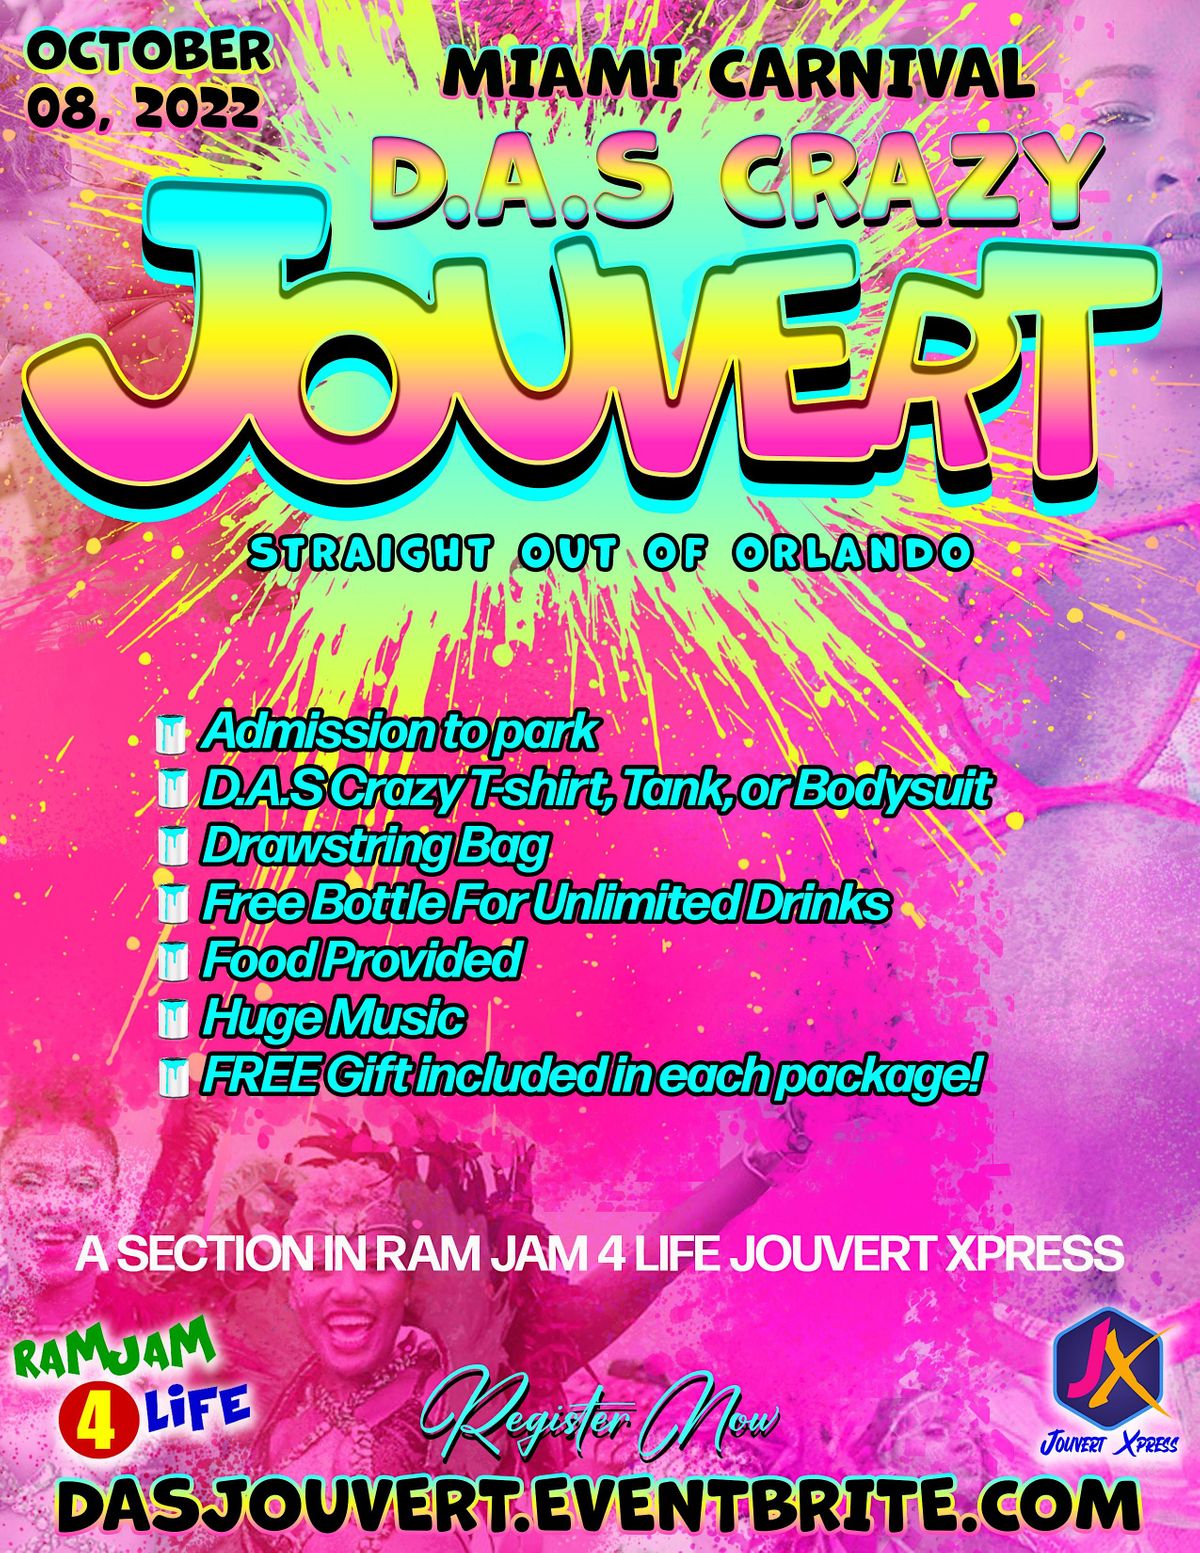 D.A.S Crazy Jouvert for Miami Carnival 2022